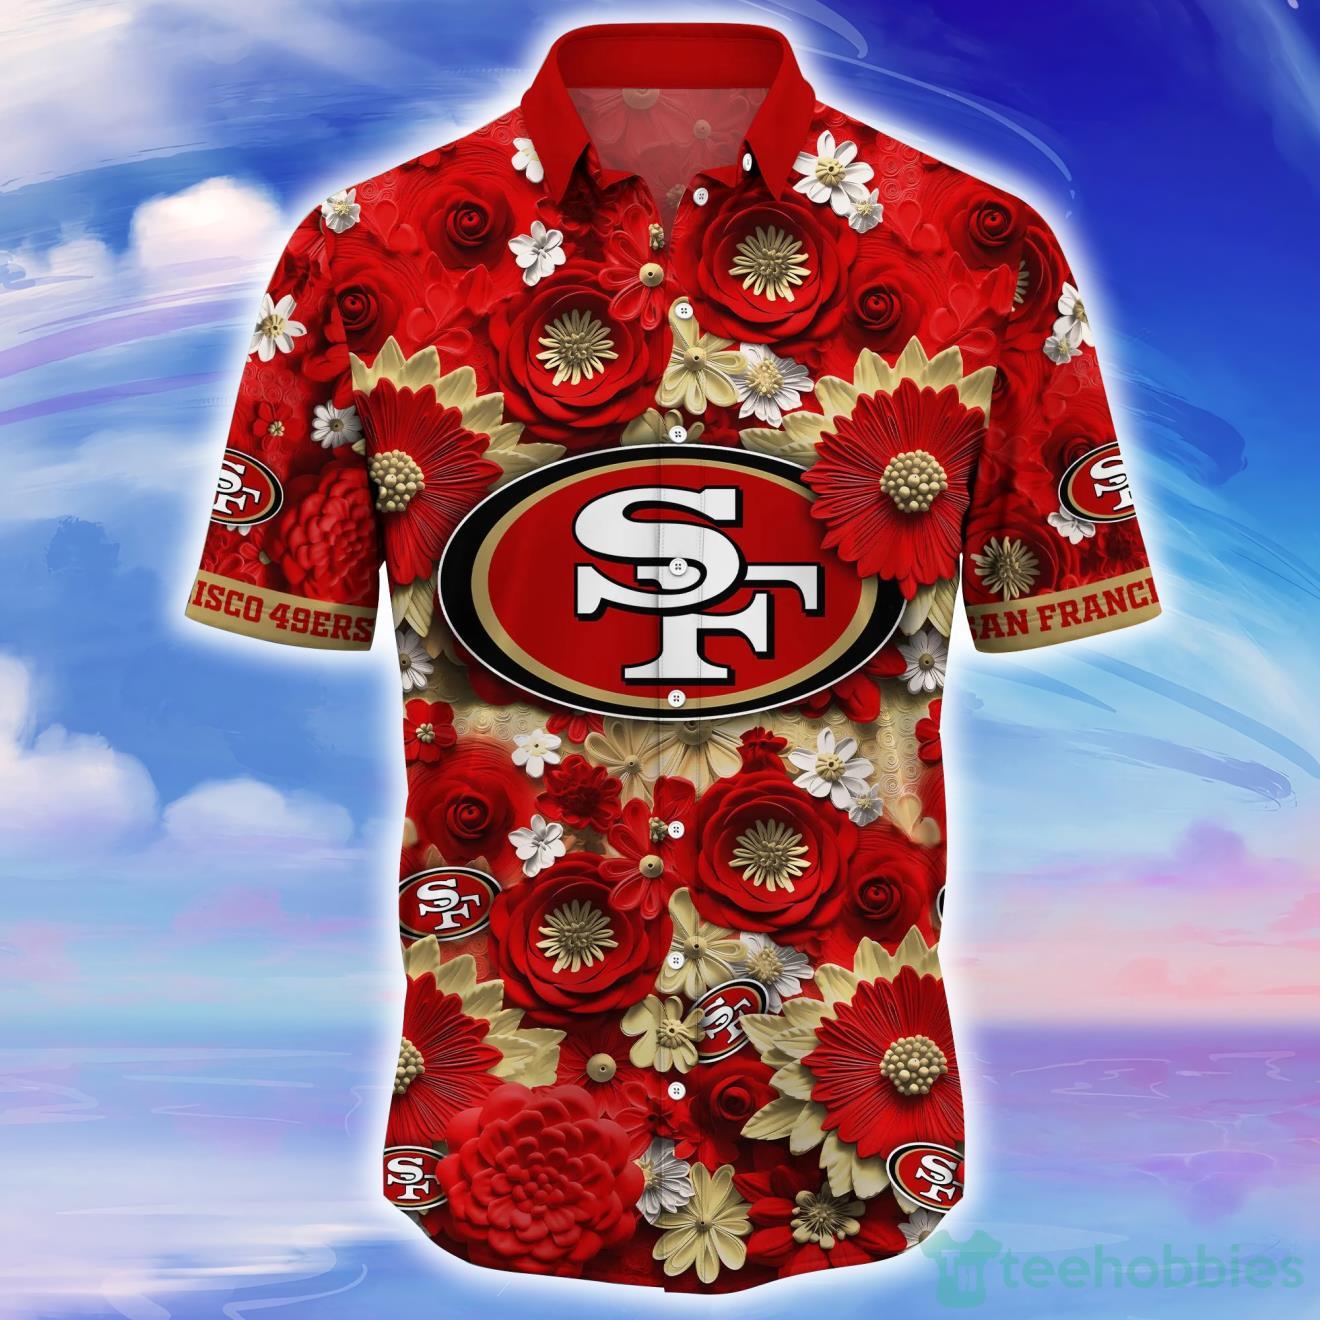 49ers jersey for men